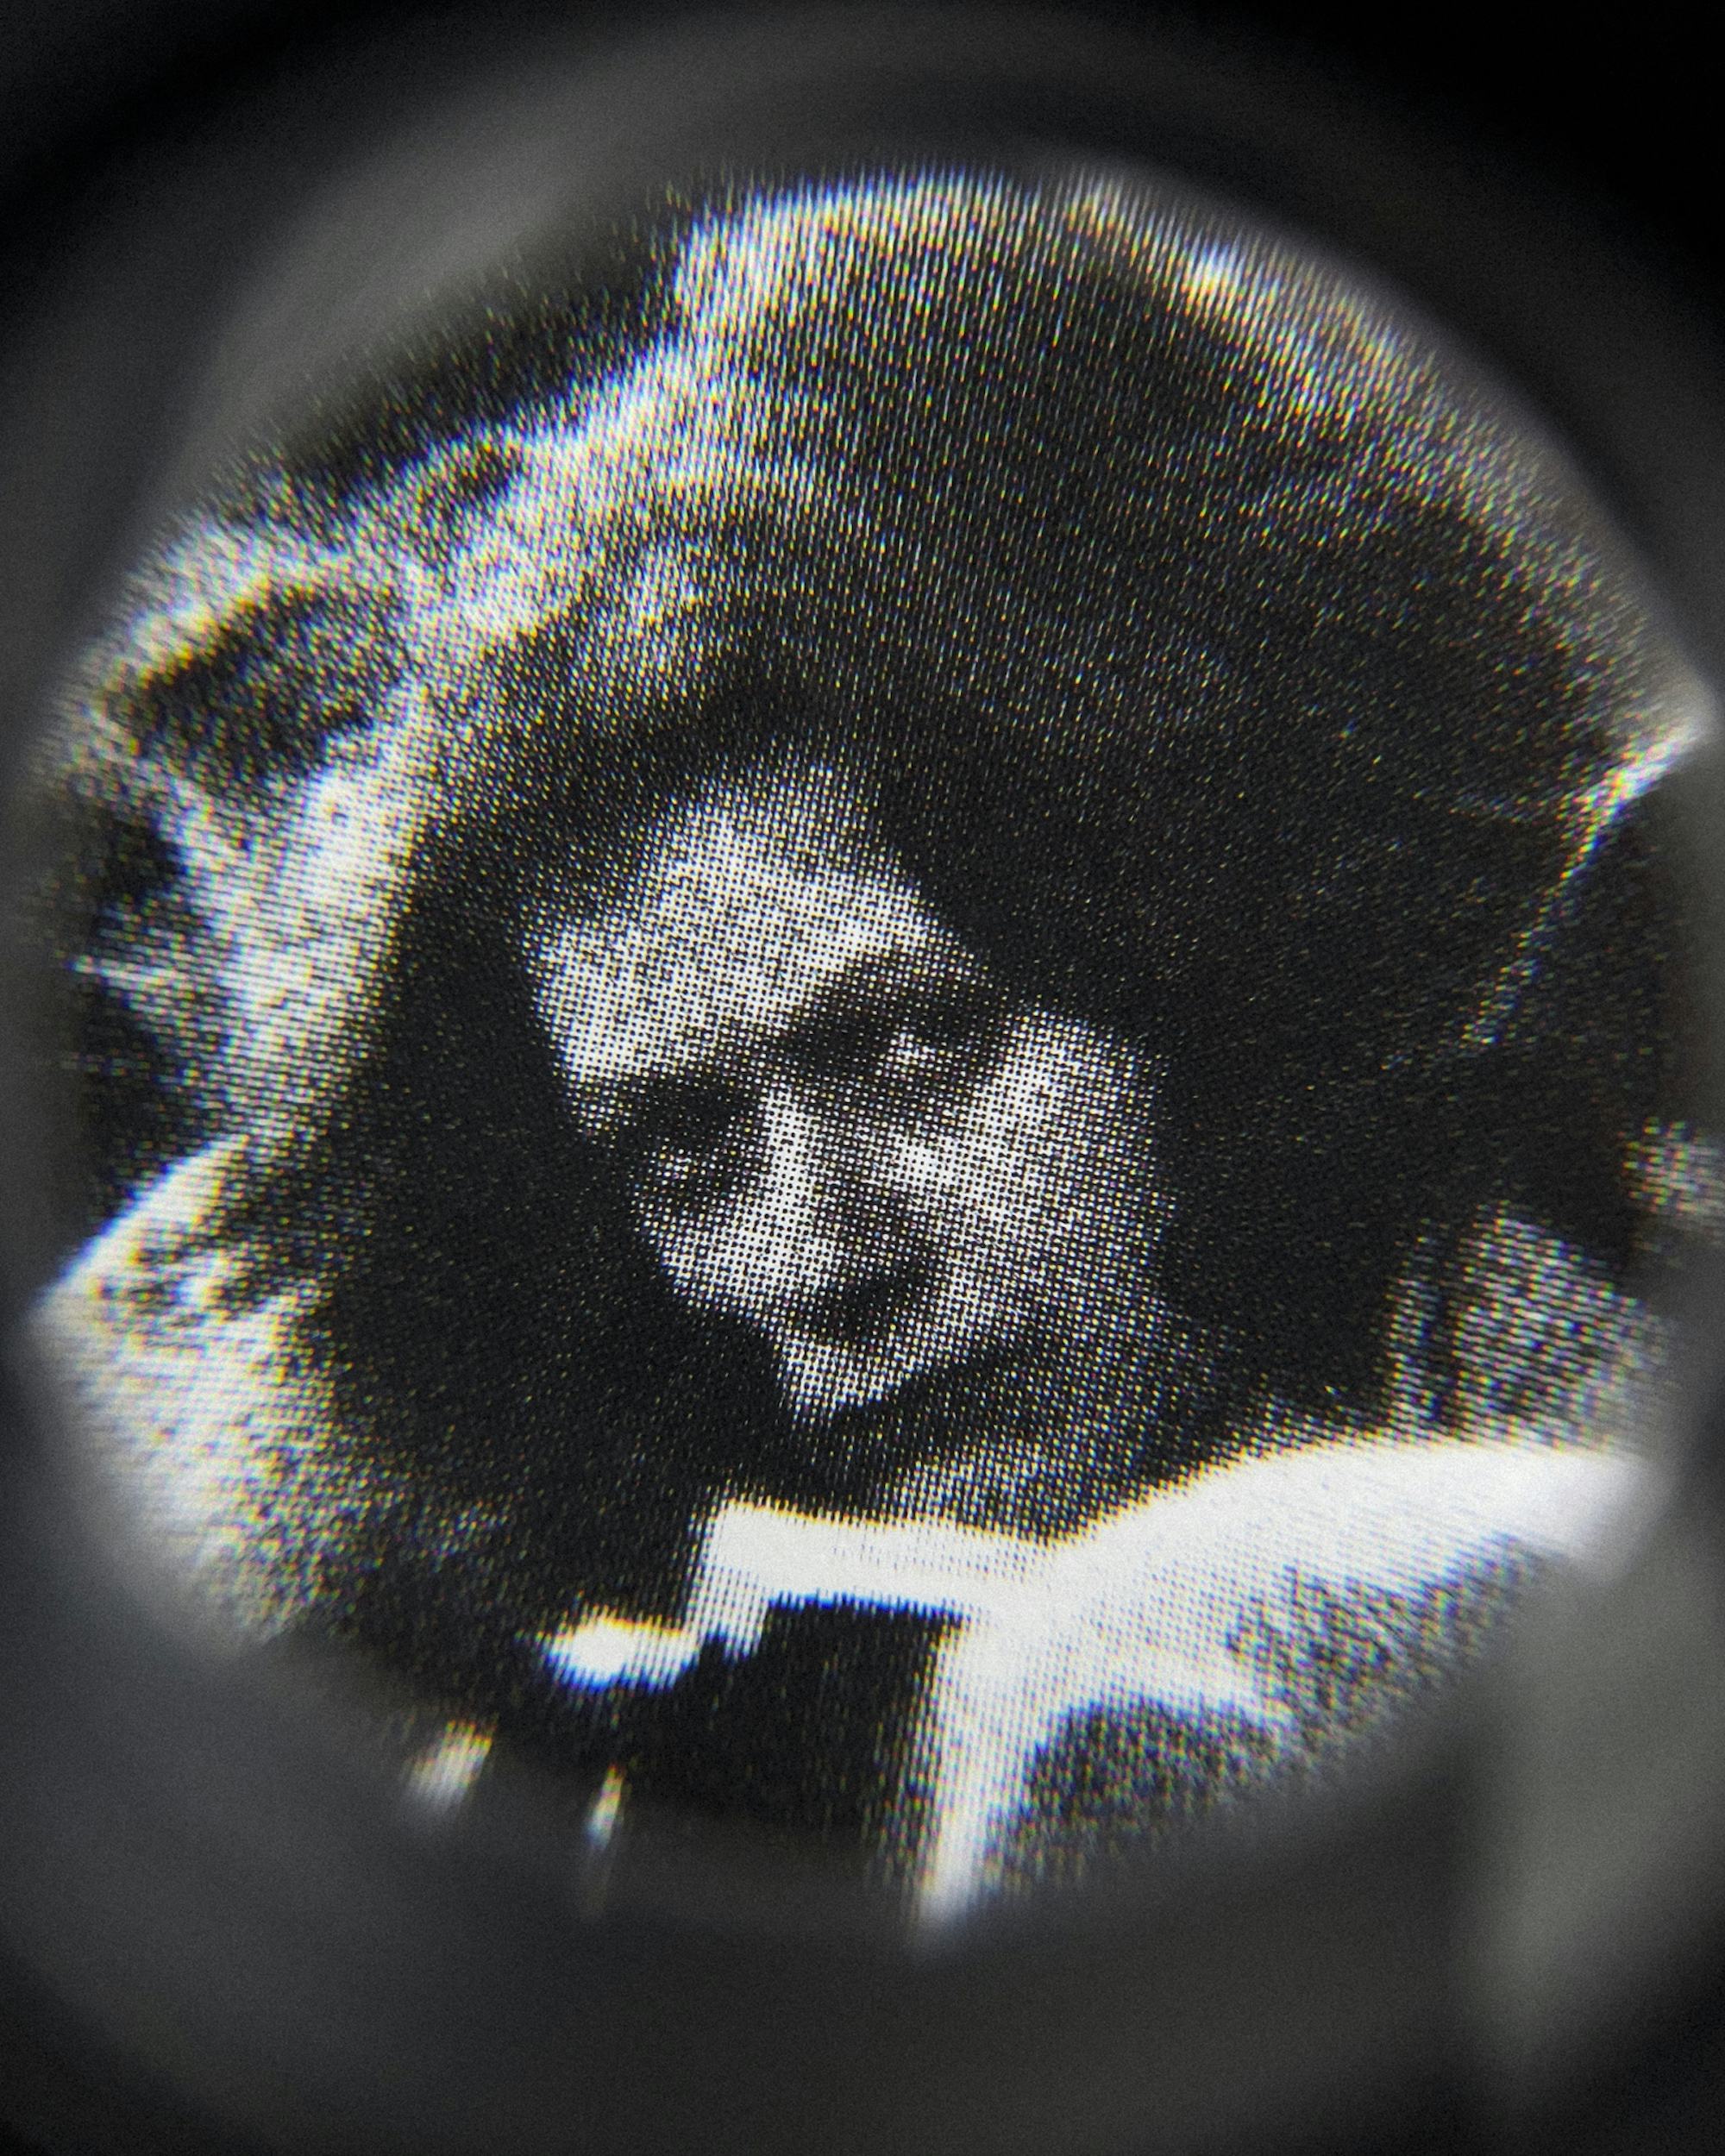 Black and white close-up image of an existing photograph, showing a woman staring into the camera. Shot through a magnifying lens © Amin Yousefi